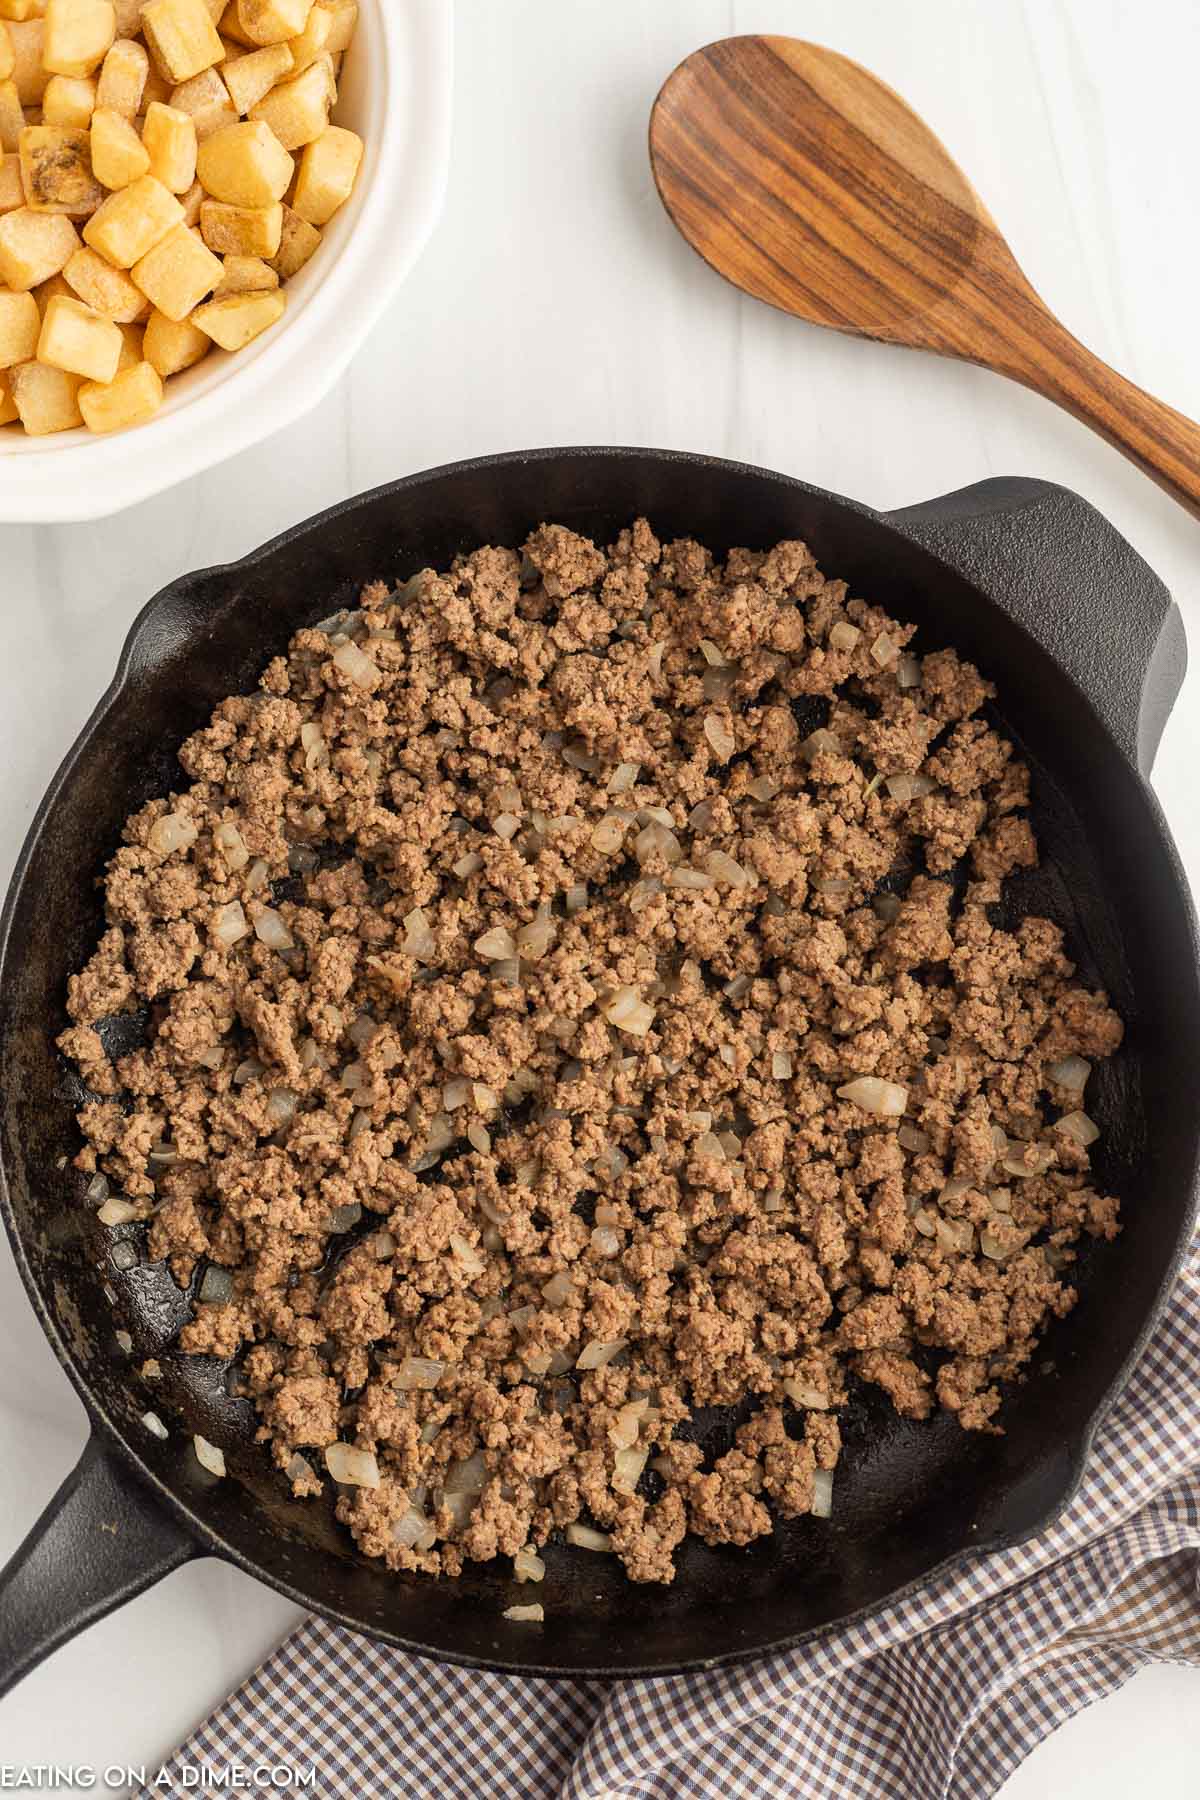 Cooking ground beef in diced onions